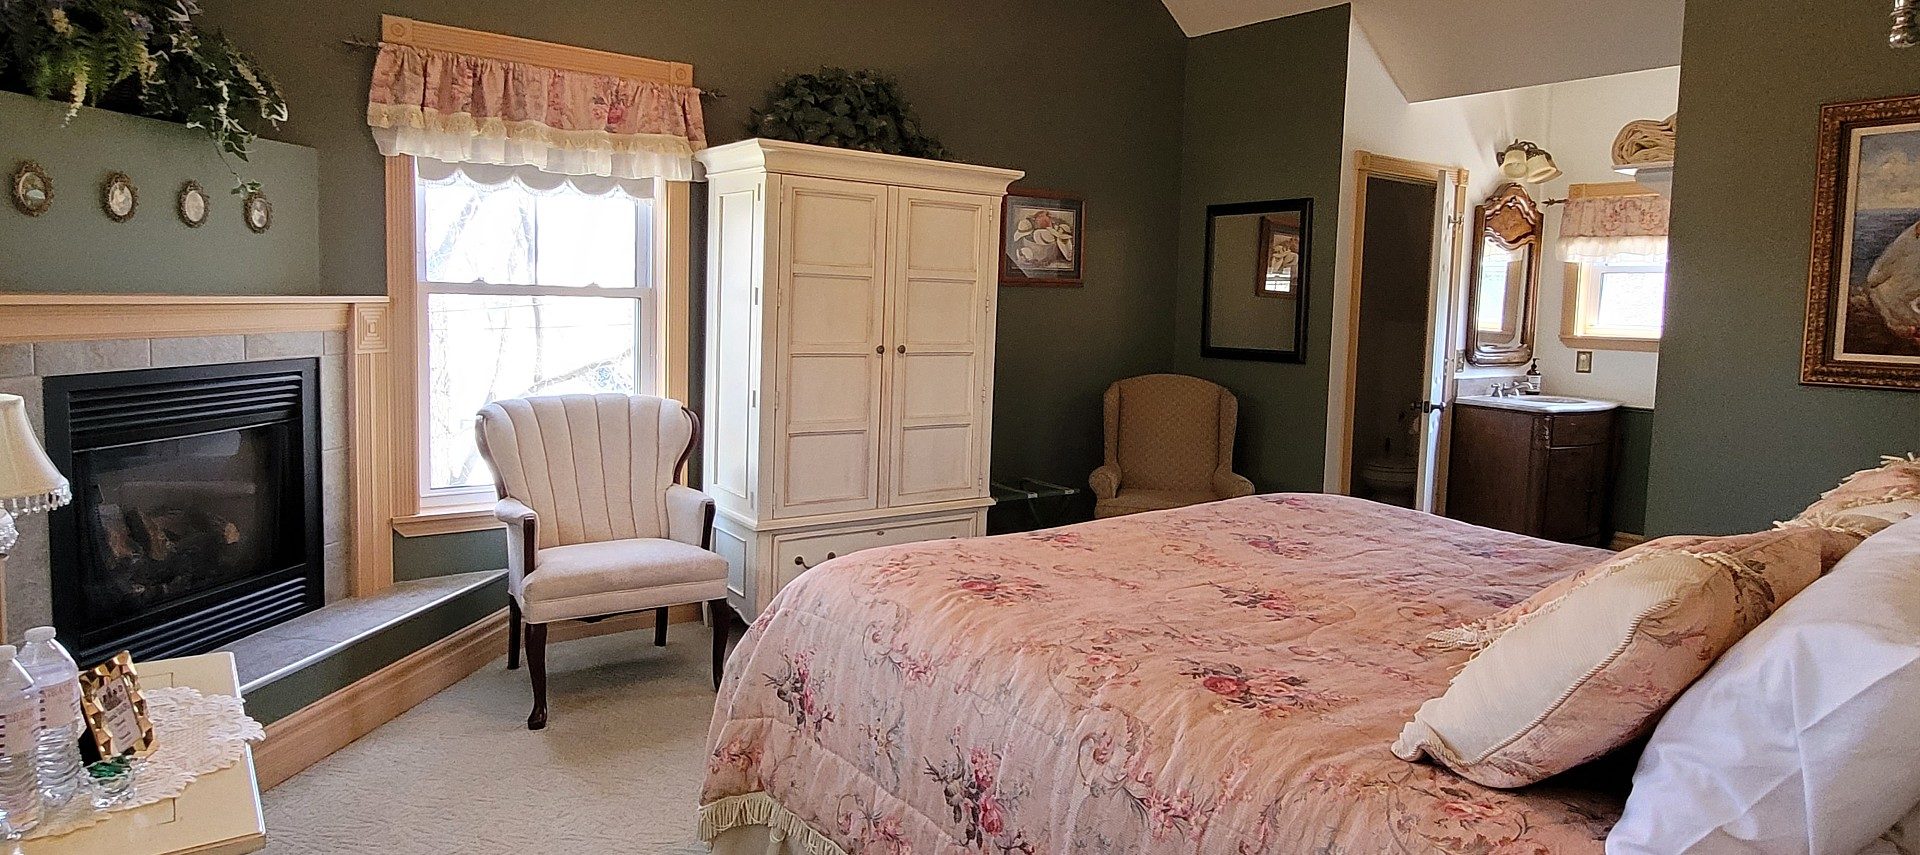 Spacious bedroom with gas fireplace, white armoire, bathroom nook and bright windows